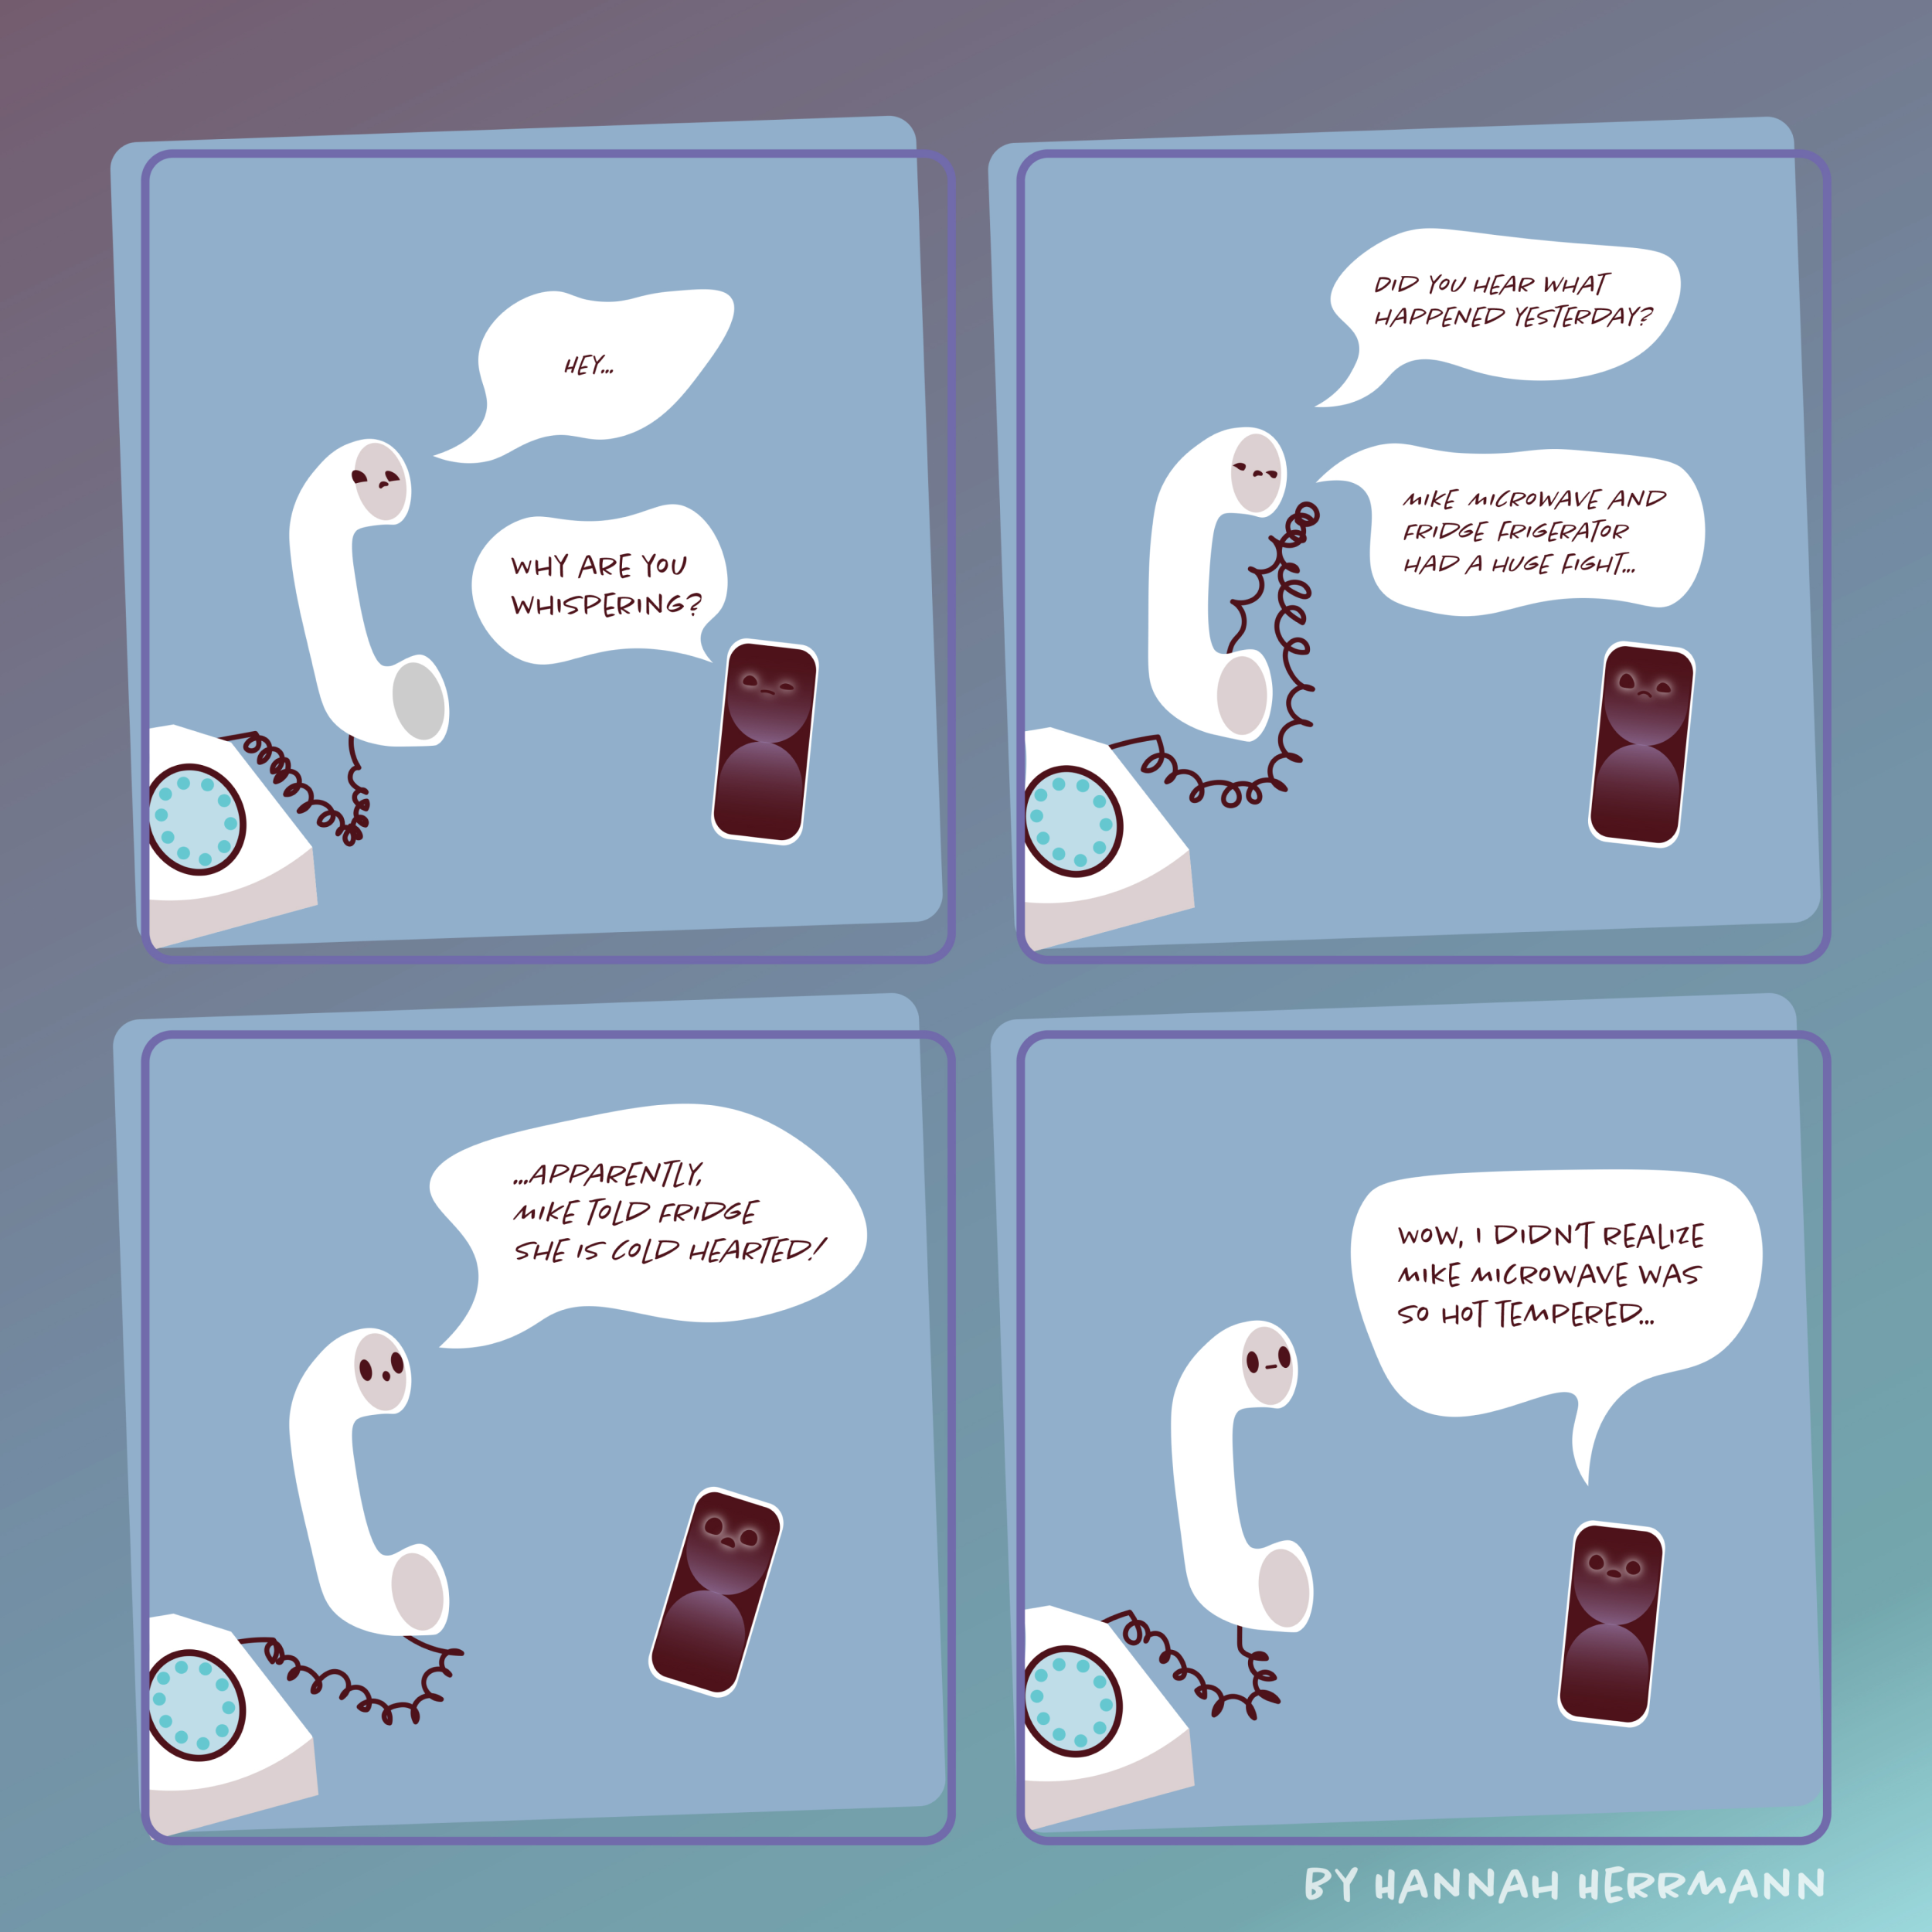 Comic of a land-line talking with cellphone